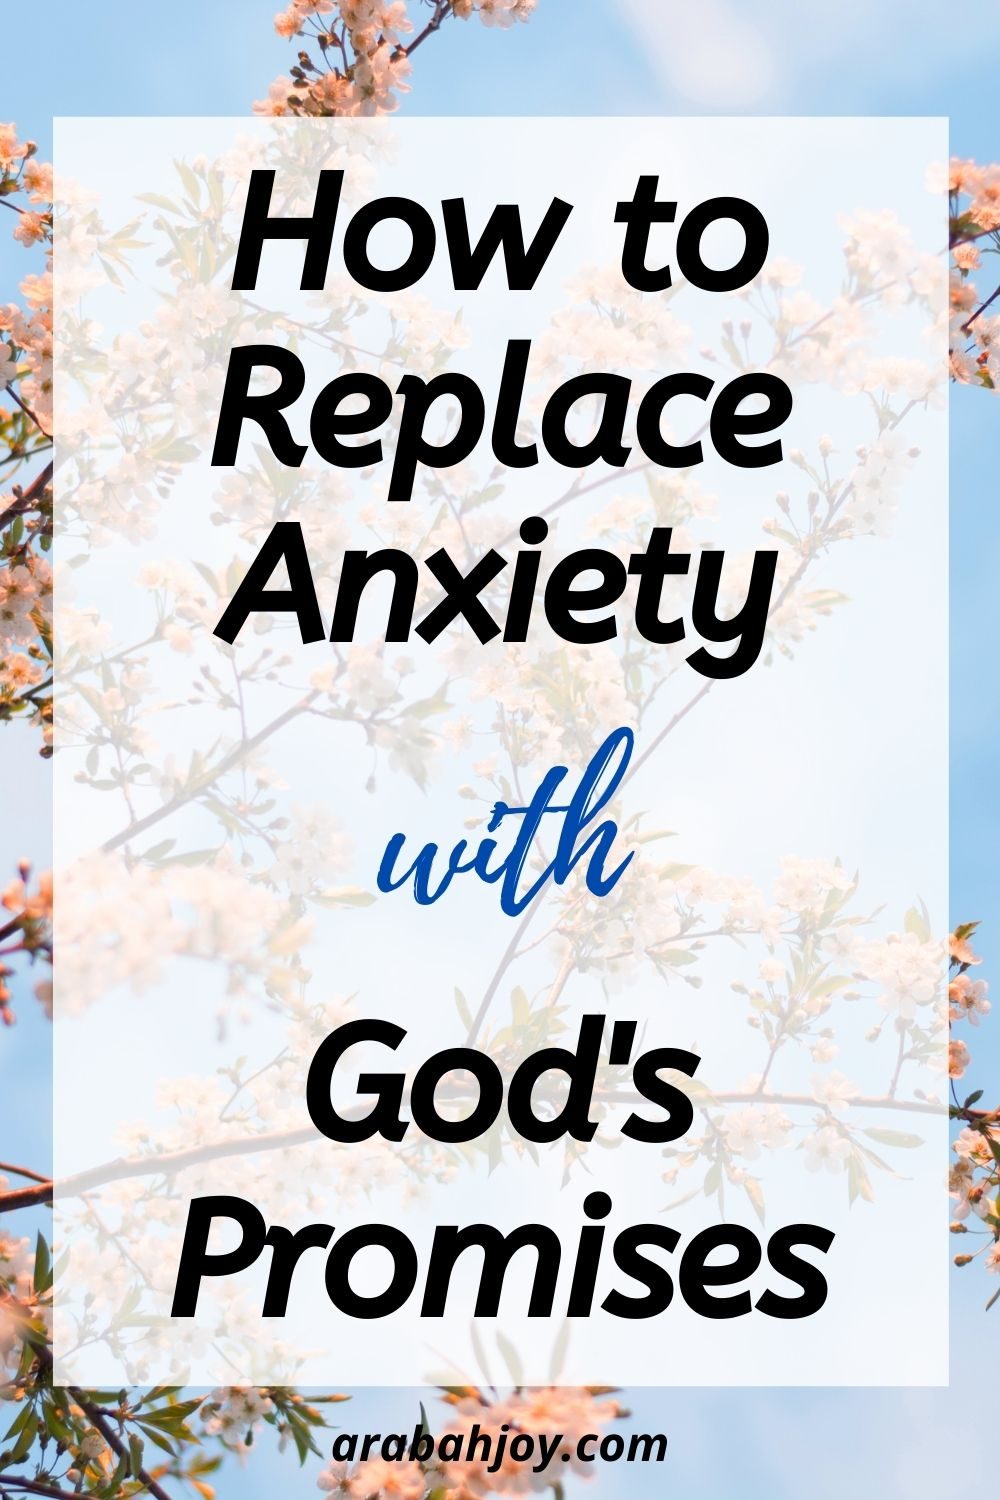 Scripture is great for combating and overcoming anxiety. Here is how to replace anxiety with the promises of God